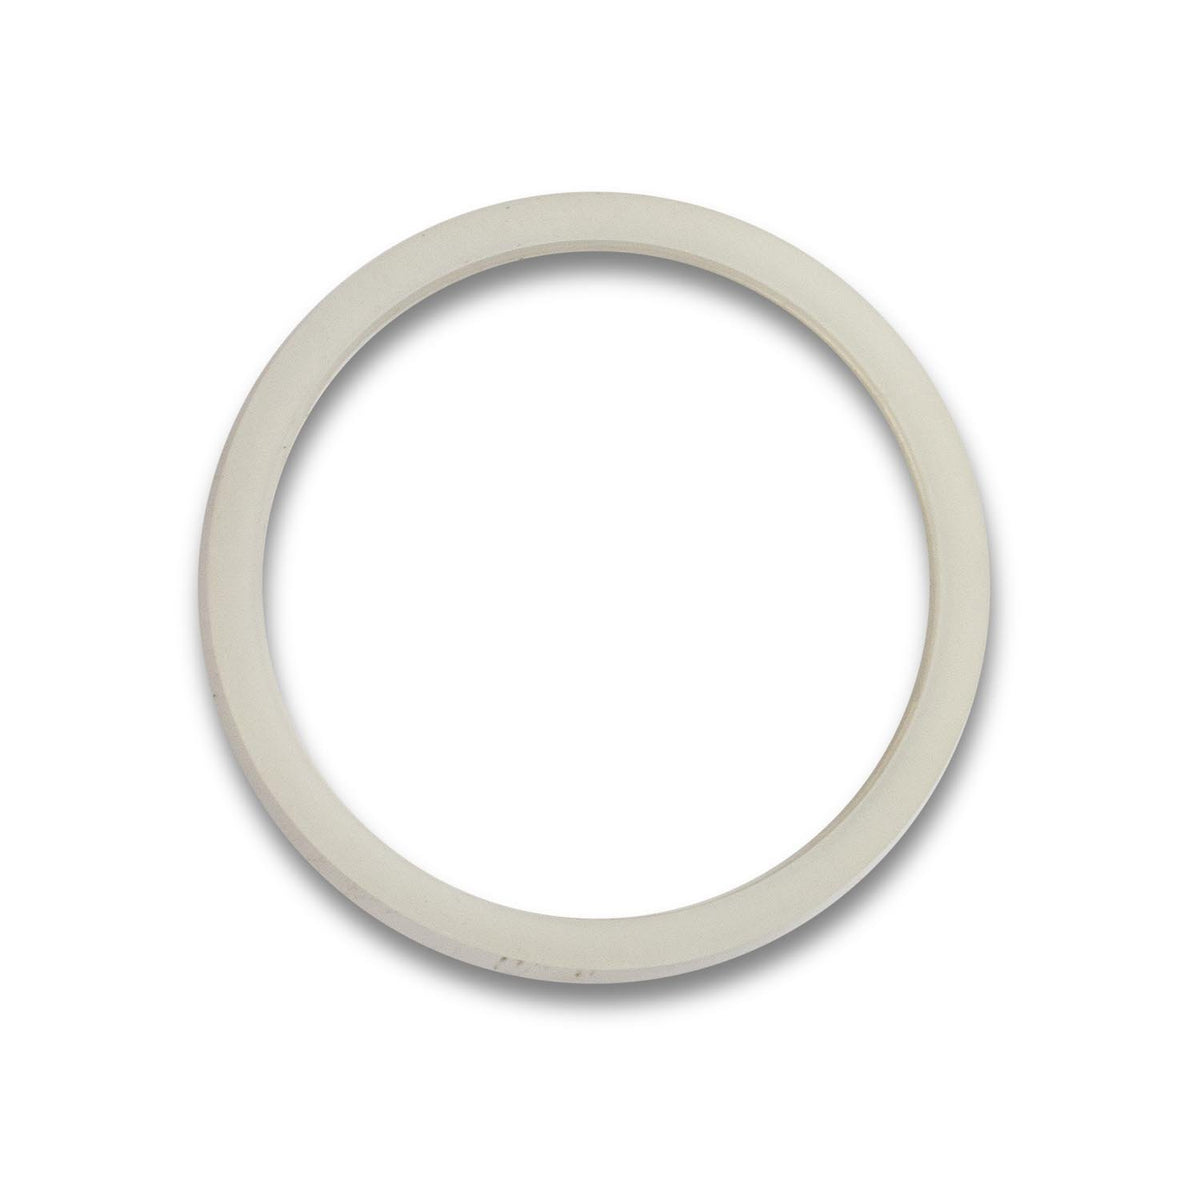 2.5" x 20" Stainless Steel Sump O-Ring - Parts - Crystal Quest Water Filters